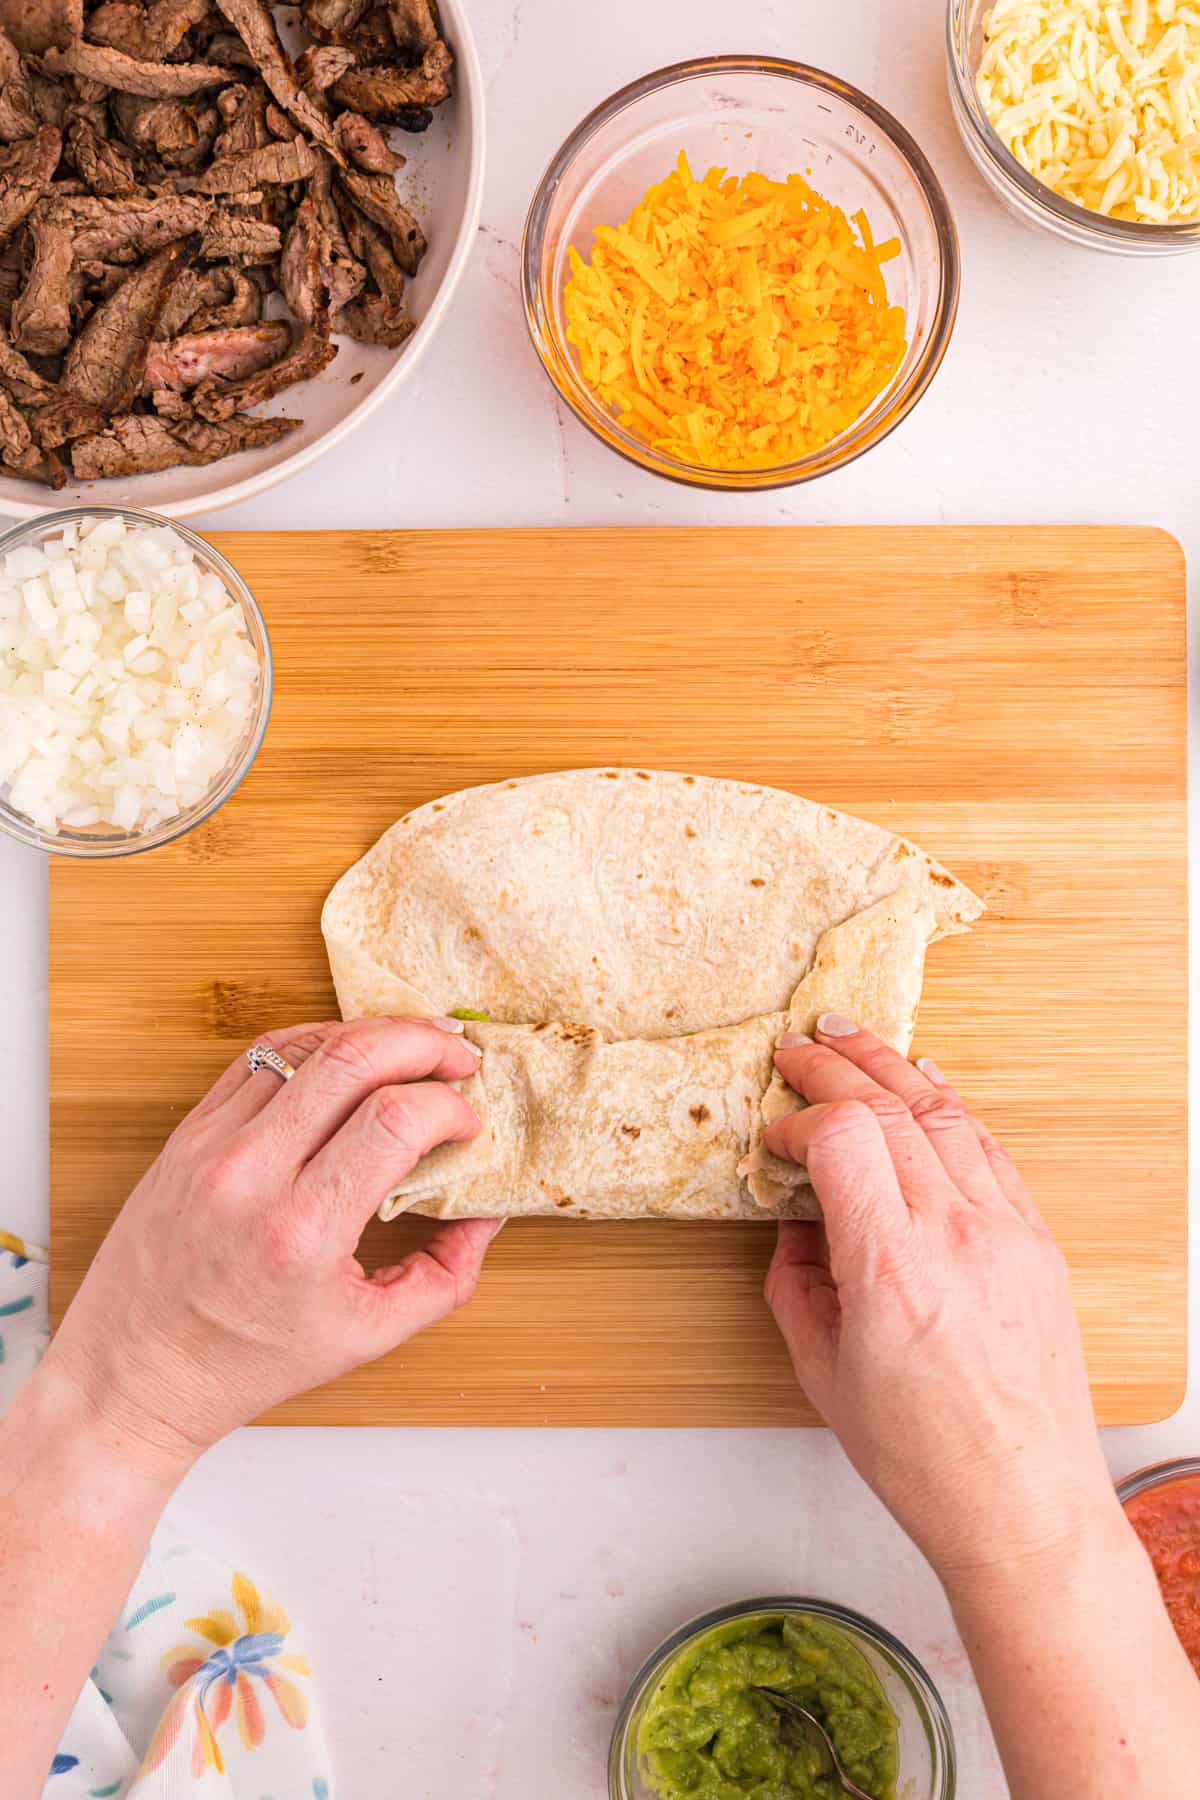 A burrito is being rolled on a wooden cutting board.